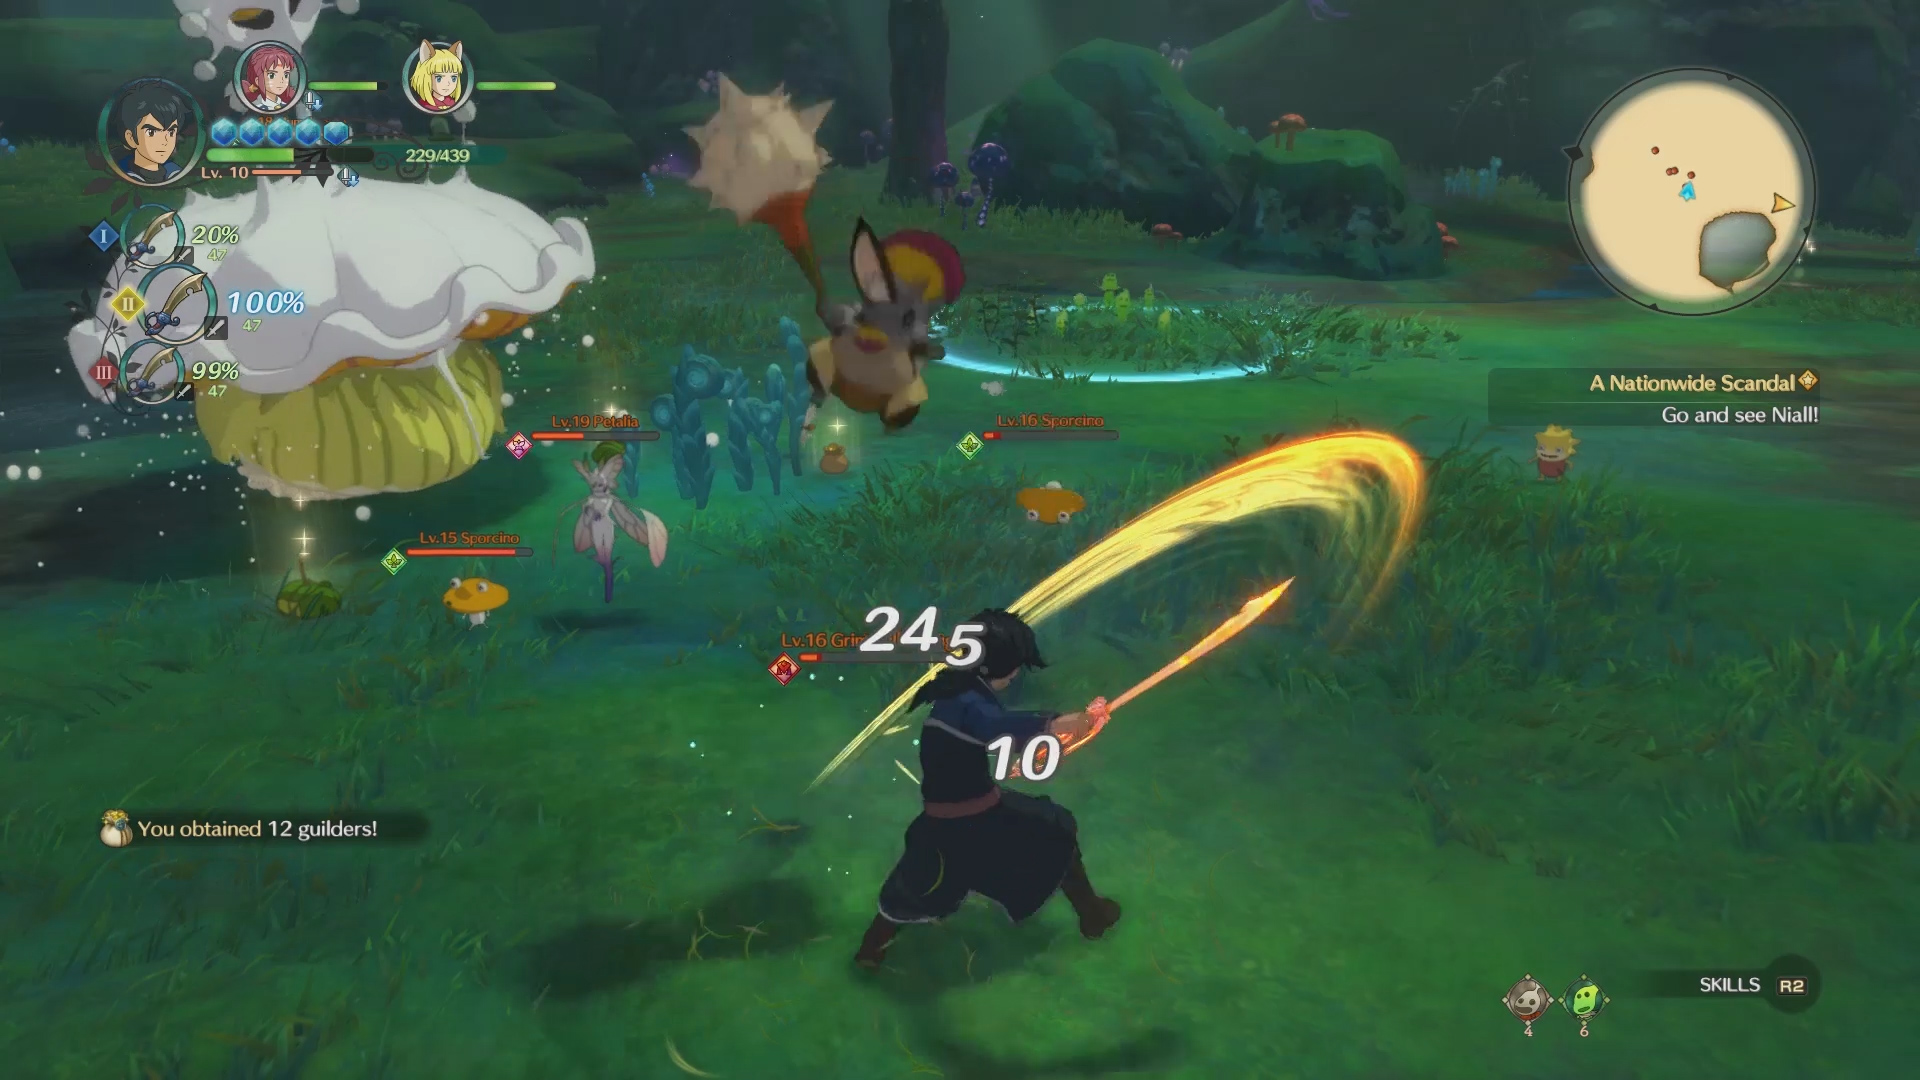 After fours hours of play, there's a lot new in Ni No Kuni 2